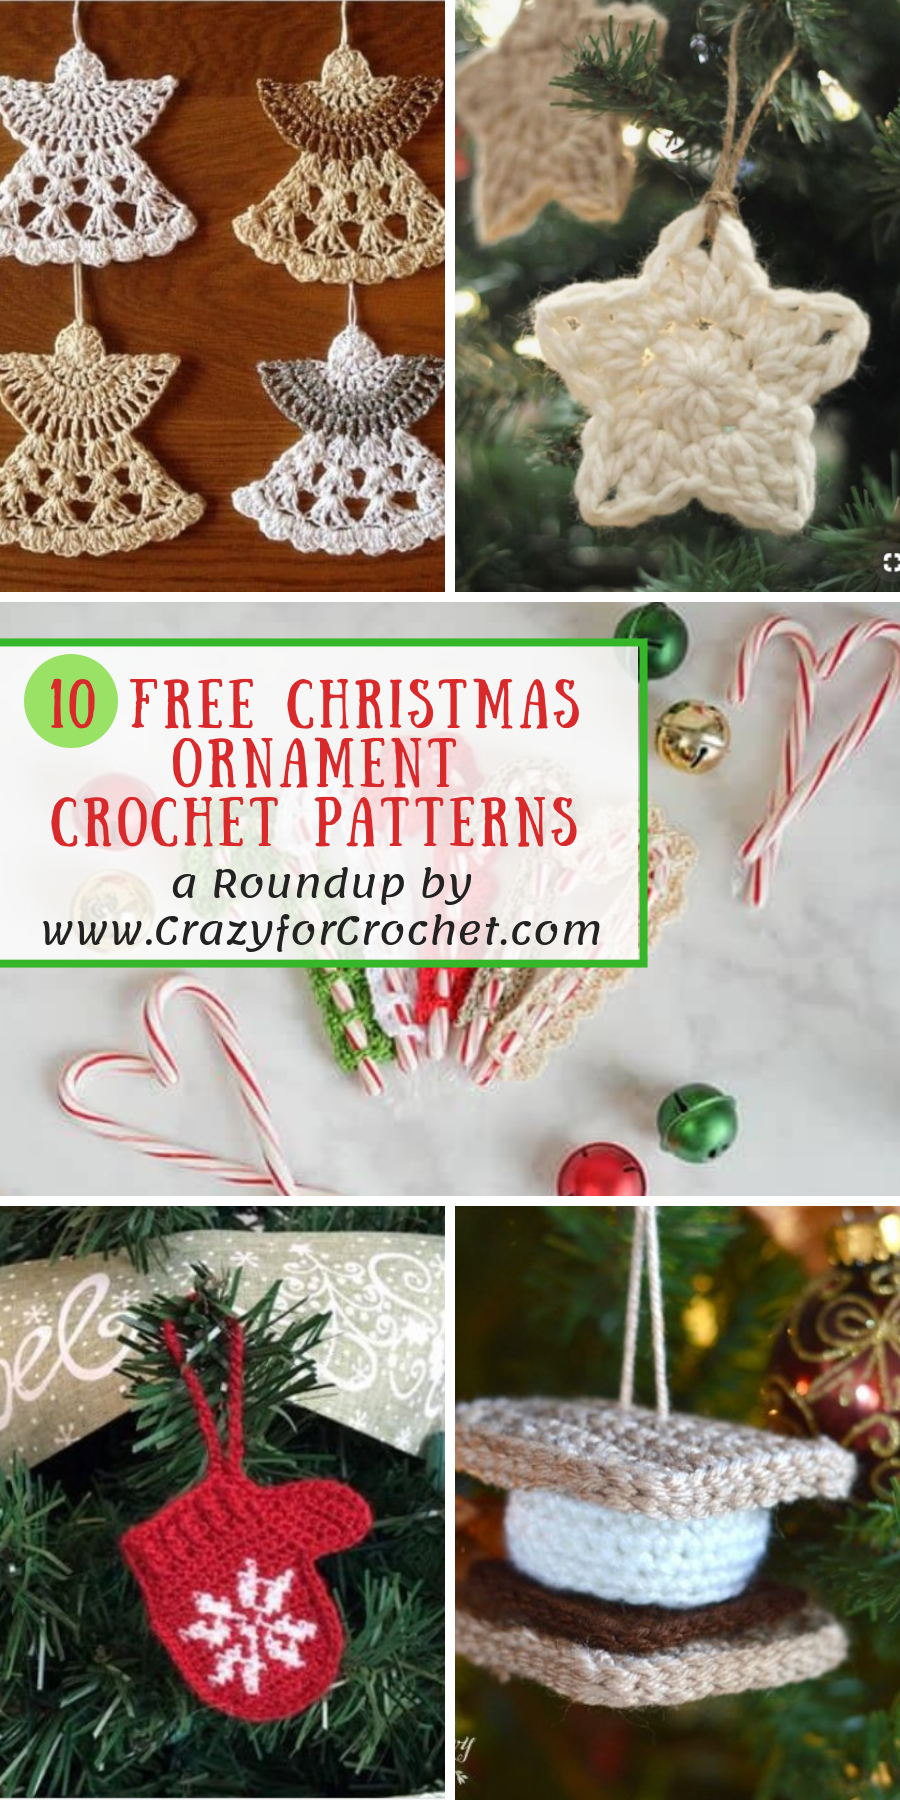 Crochet Decoration Patterns Trim Your Tree With 10 Free Crochet Christmas Ornament Patterns